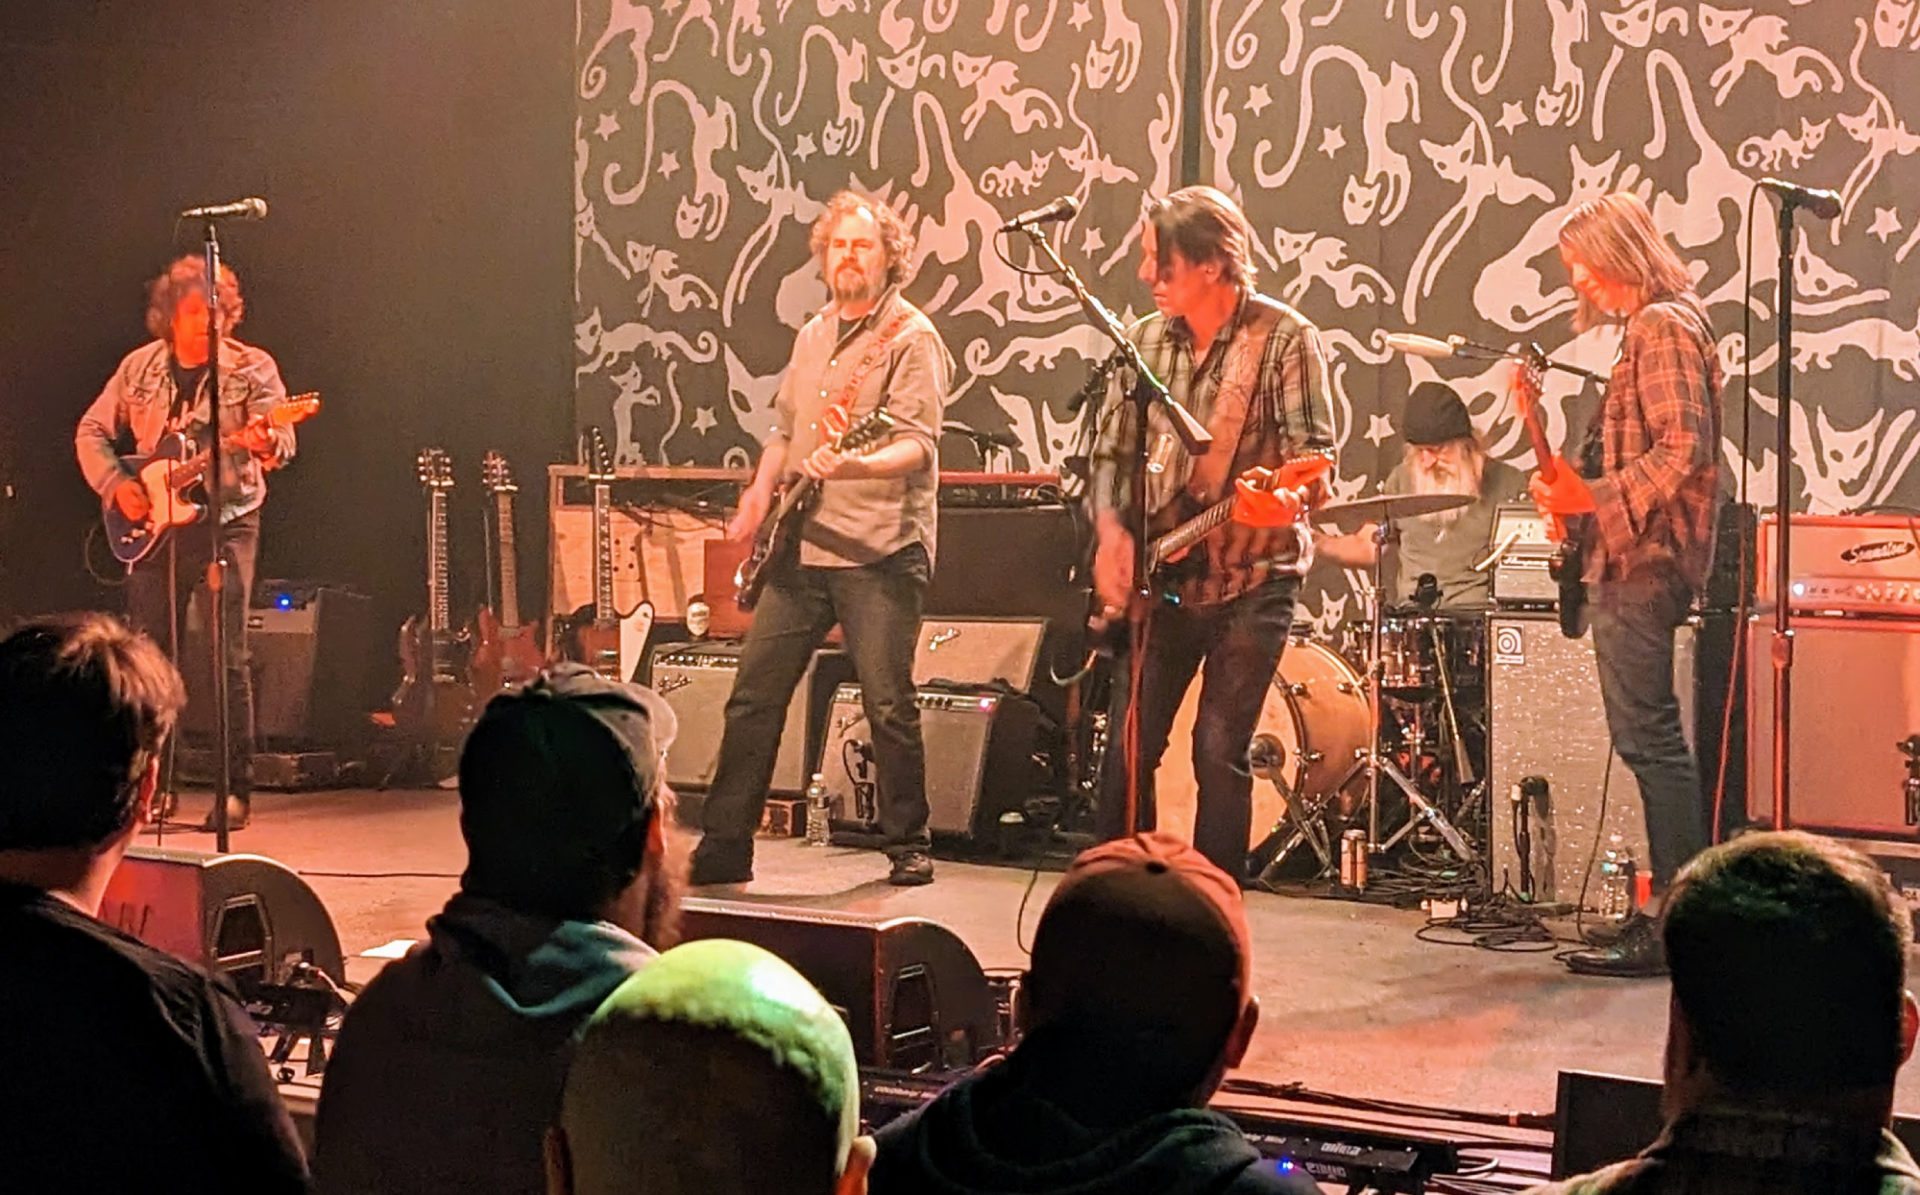 Drive-By Truckers took Canopy Club Crowd on musical journey through their extensive catalog